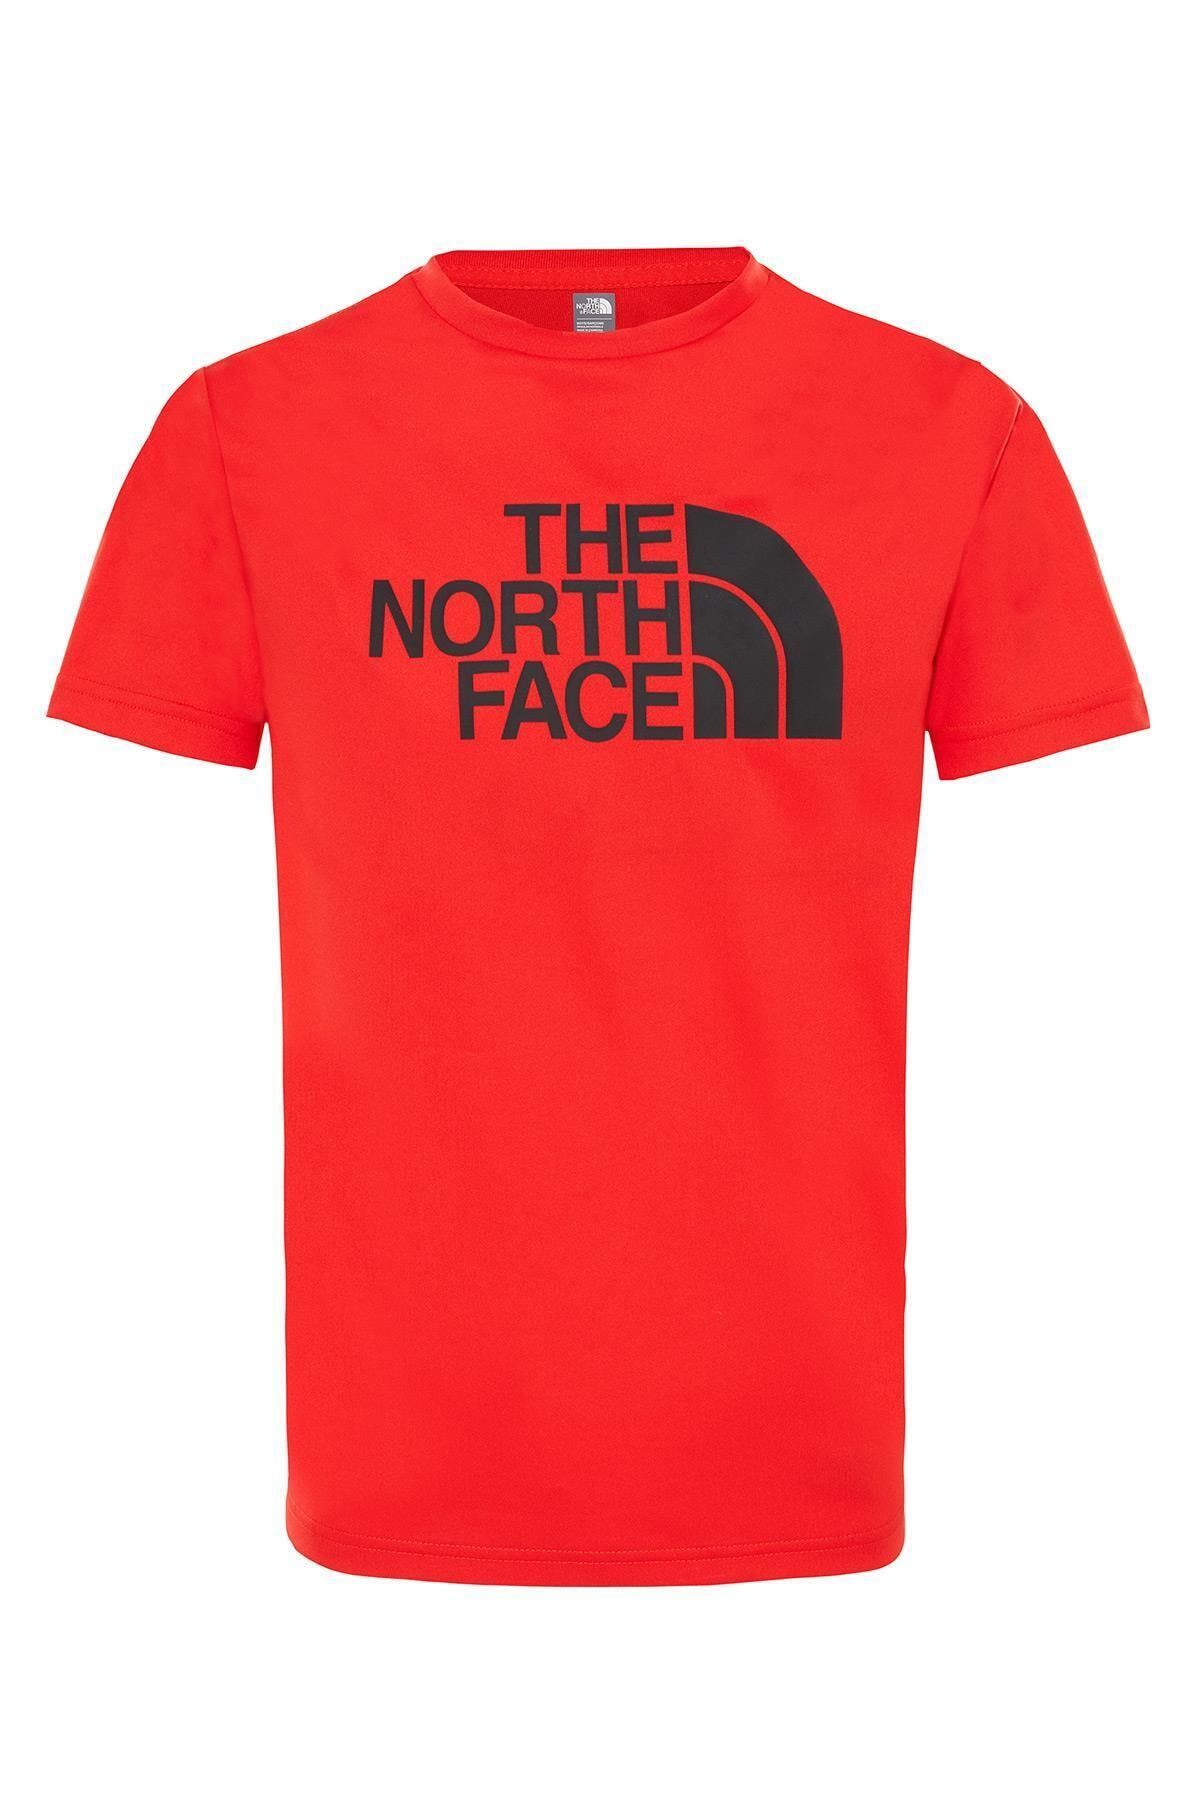 The North Face تی شرت Northface Kids S/s Reaxion 2.0 Tee T93S3515Q